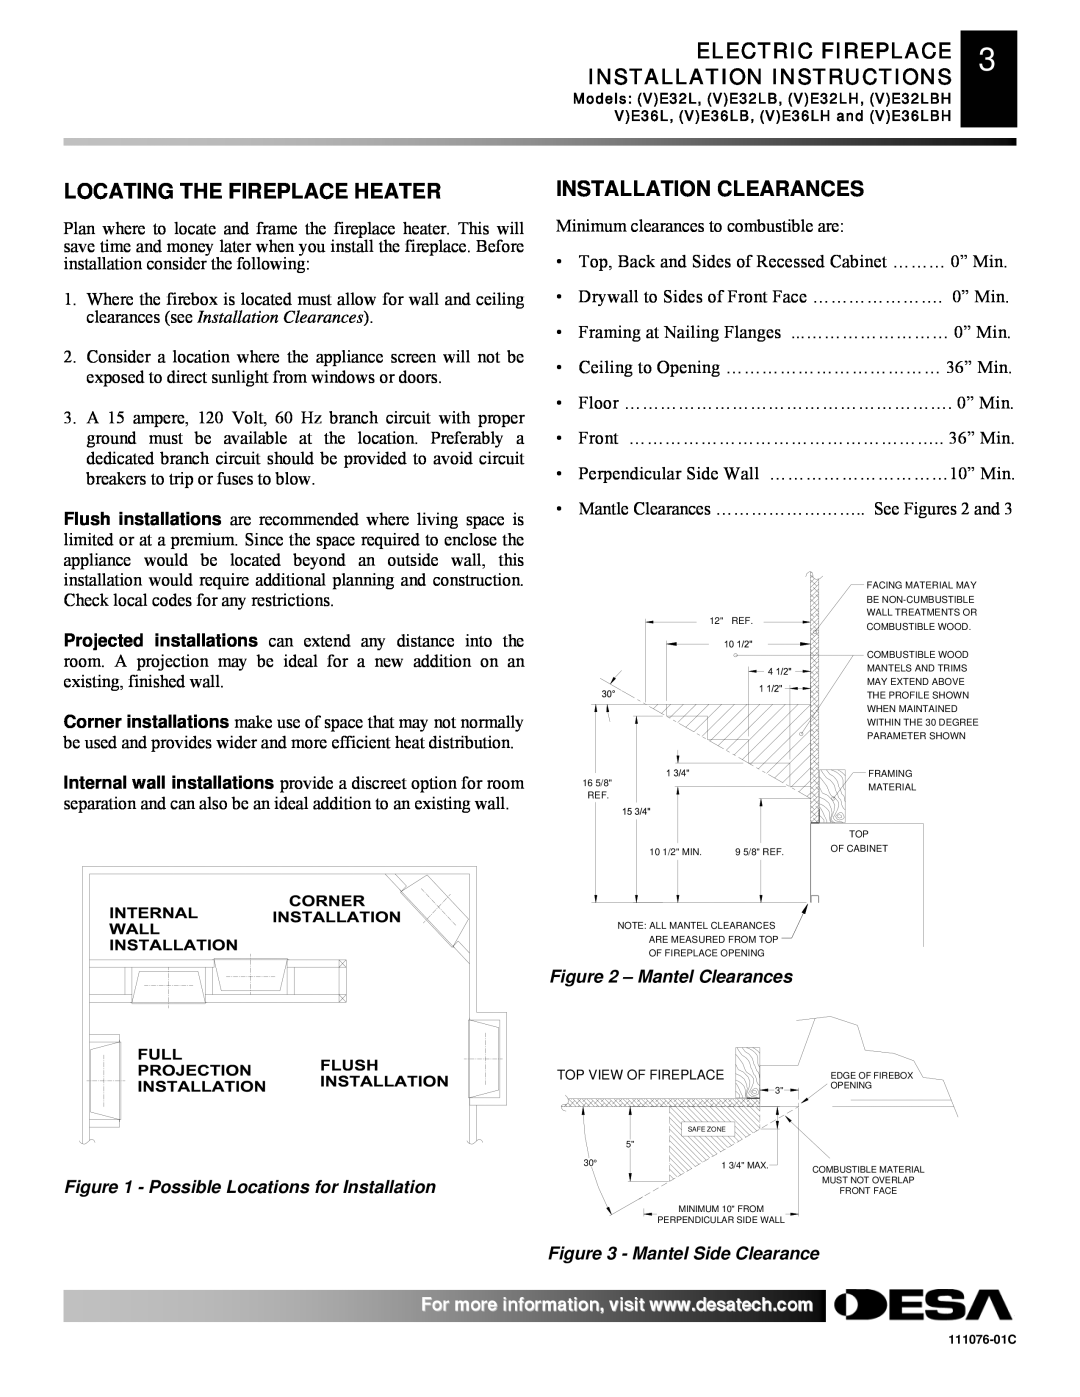 Desa E36(L)(B)(H) Locating The Fireplace Heater, ELECTRIC FIREPLACE 3 INSTALLATION INSTRUCTIONS, Installation Clearances 